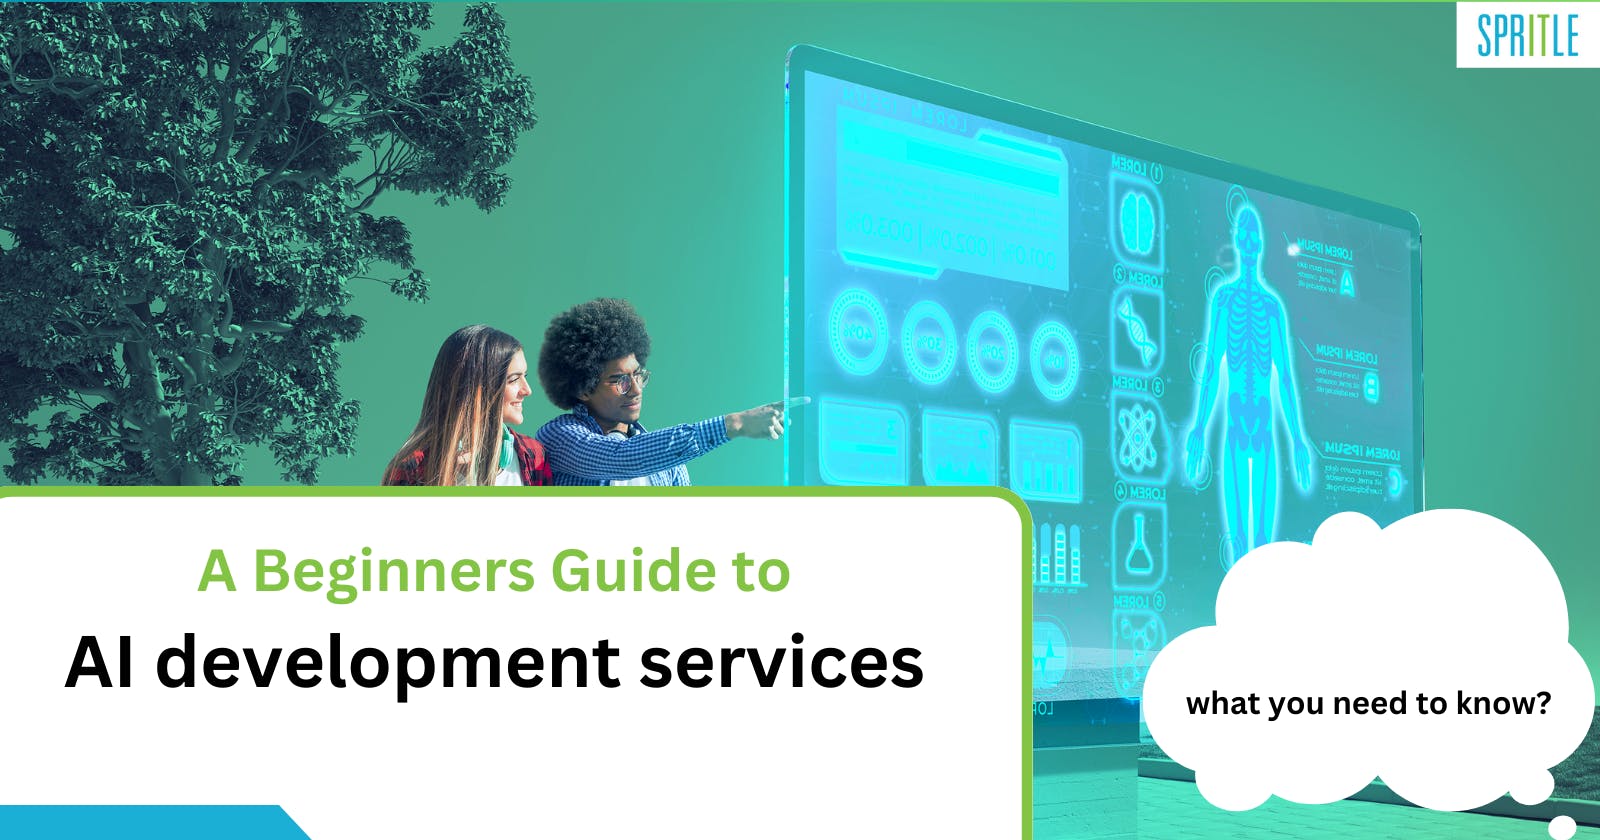 A Beginner's Guide to AI Development Services: What You Need to Know